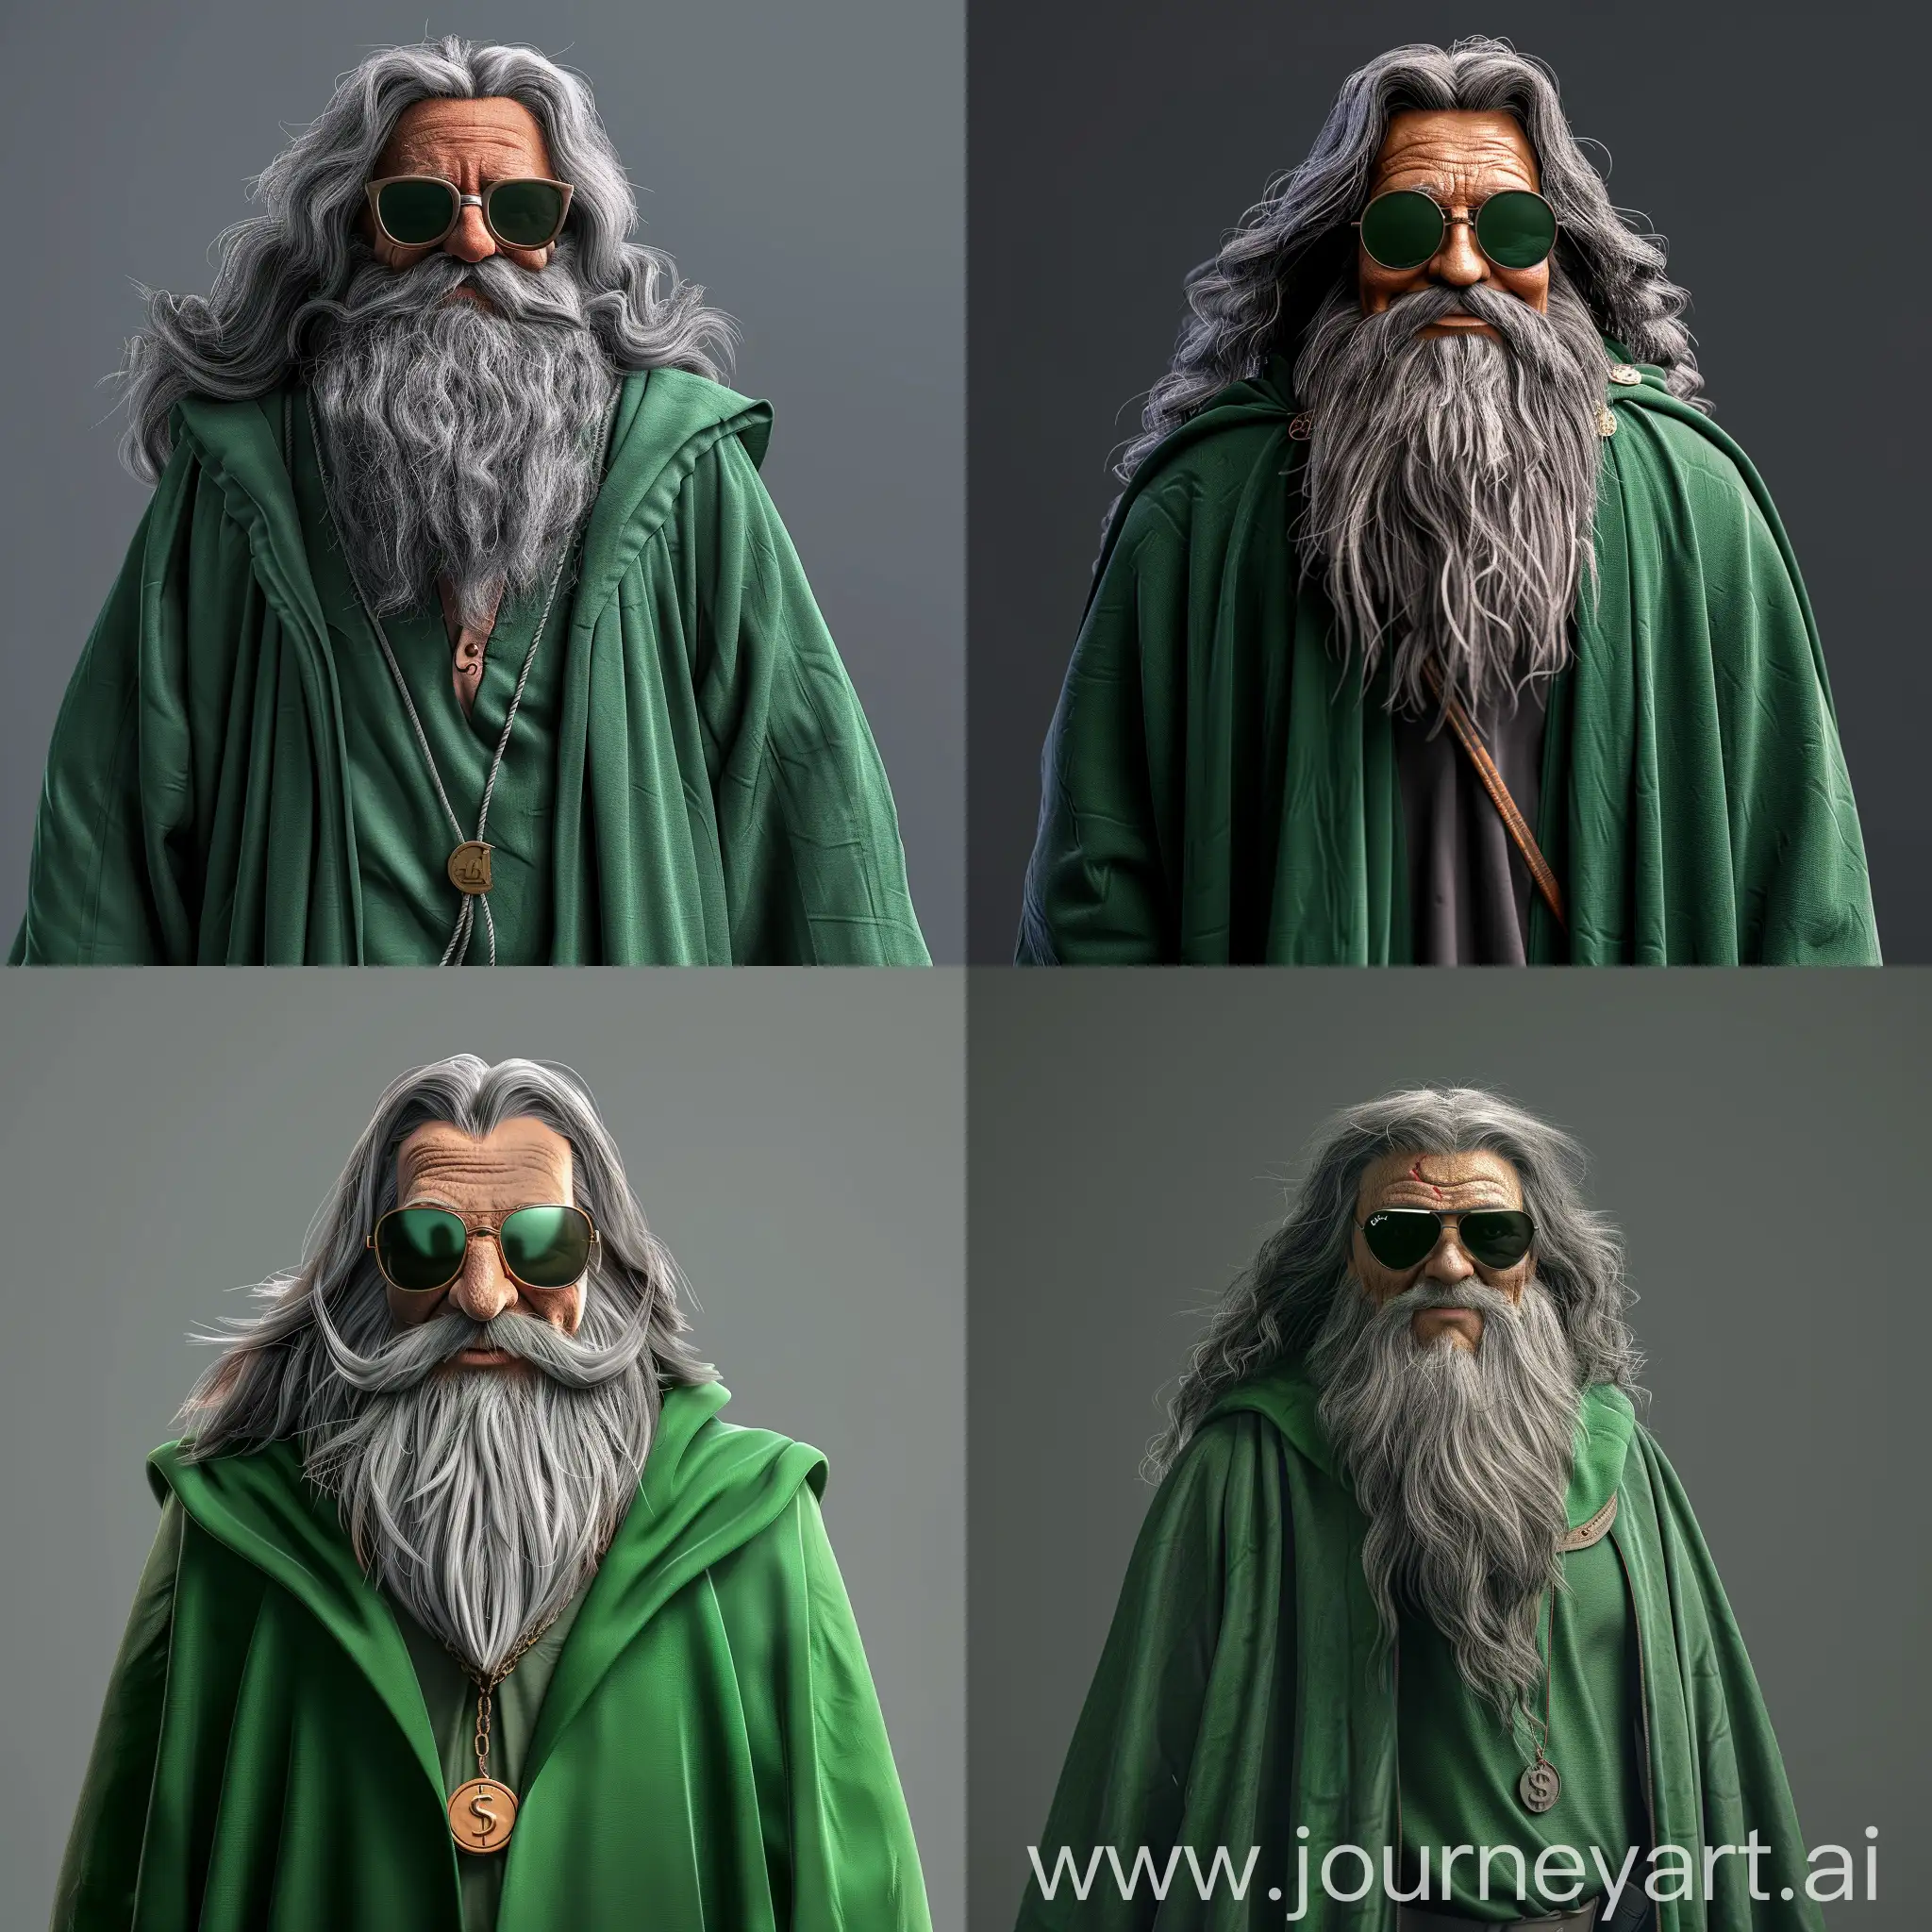 Jolly-Money-Wizard-in-Green-Robe-with-Sunglasses